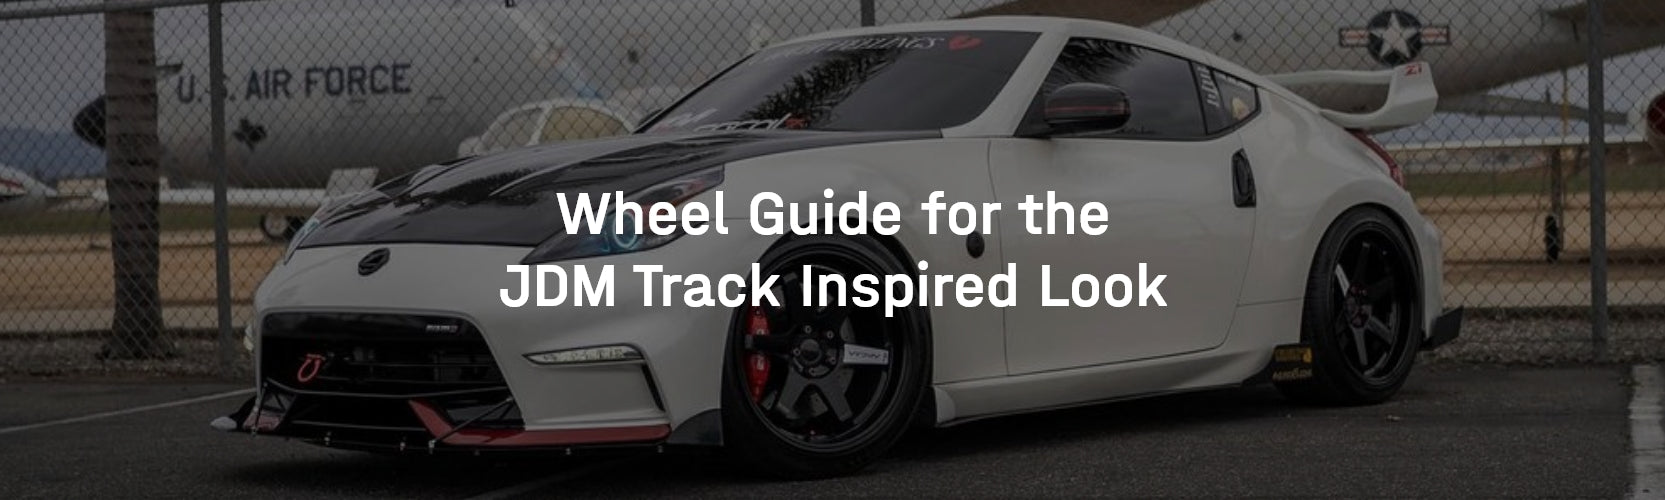 Wheel Guide for the JDM Track Inspired Look